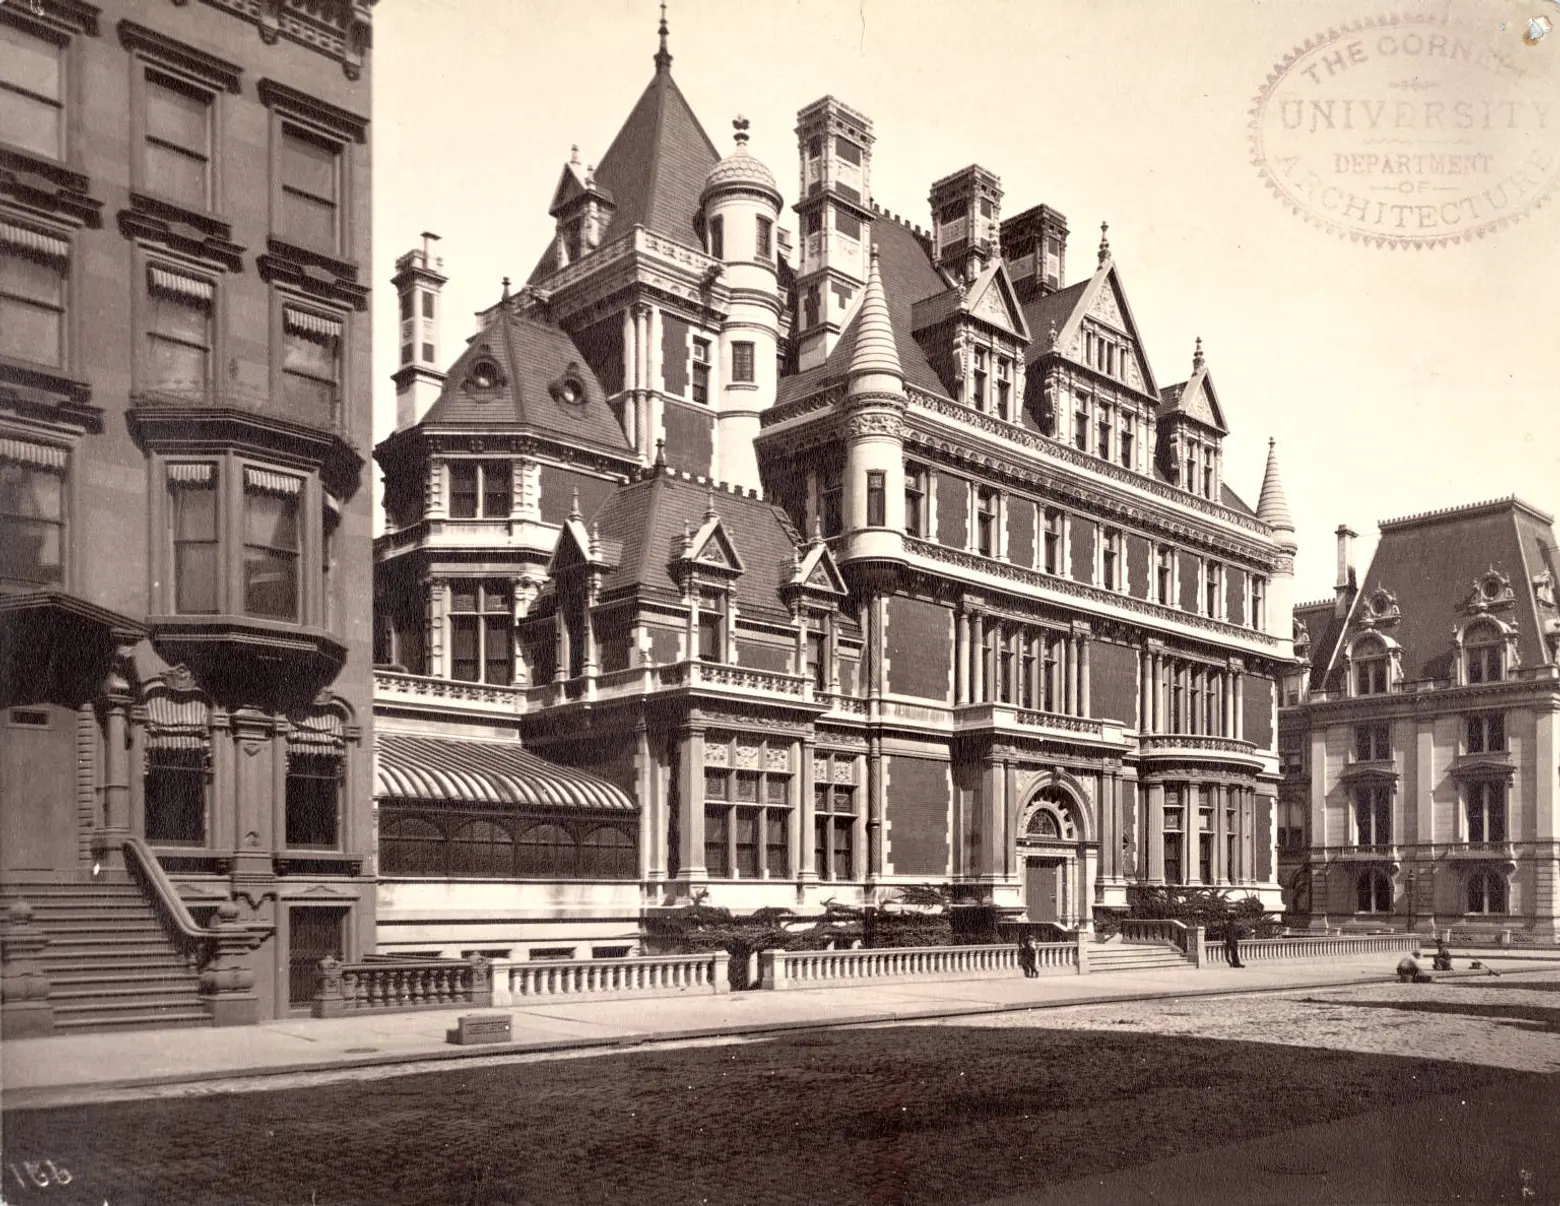 A guide to the Gilded Age mansions of 5th Avenue’s millionaire row